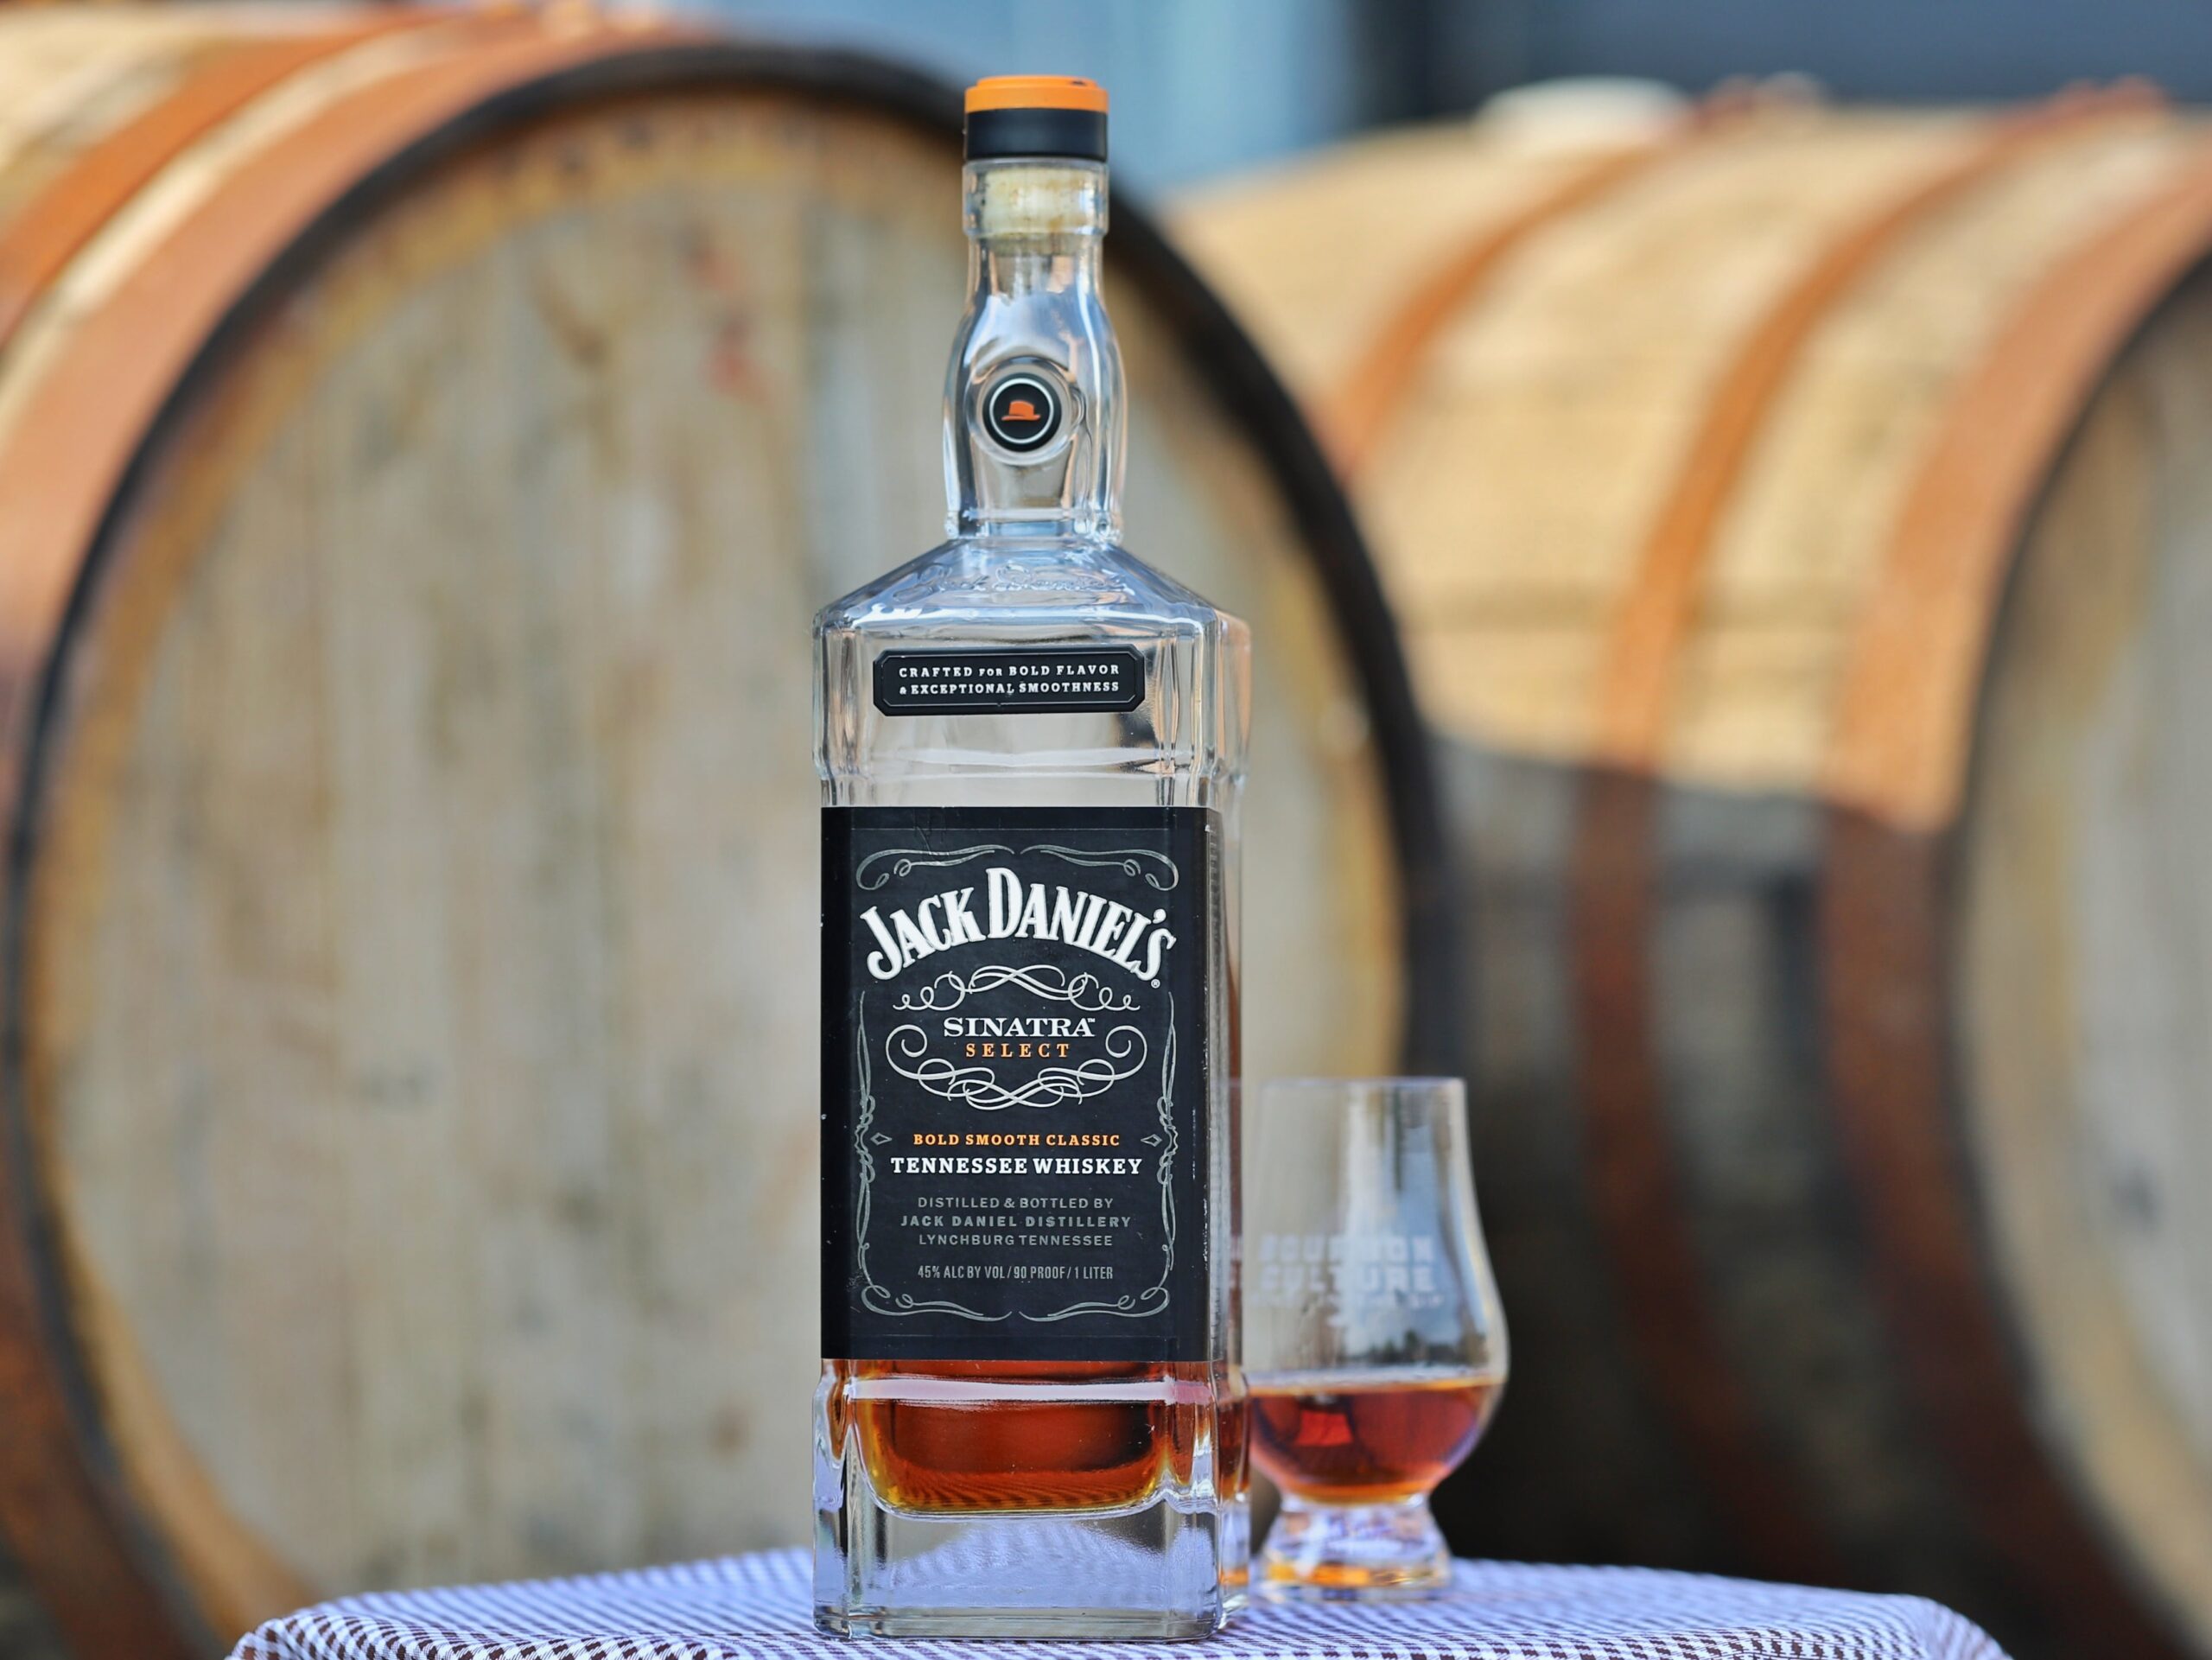 Jack Daniel’s Sinatra Select Tennessee Whiskey Review